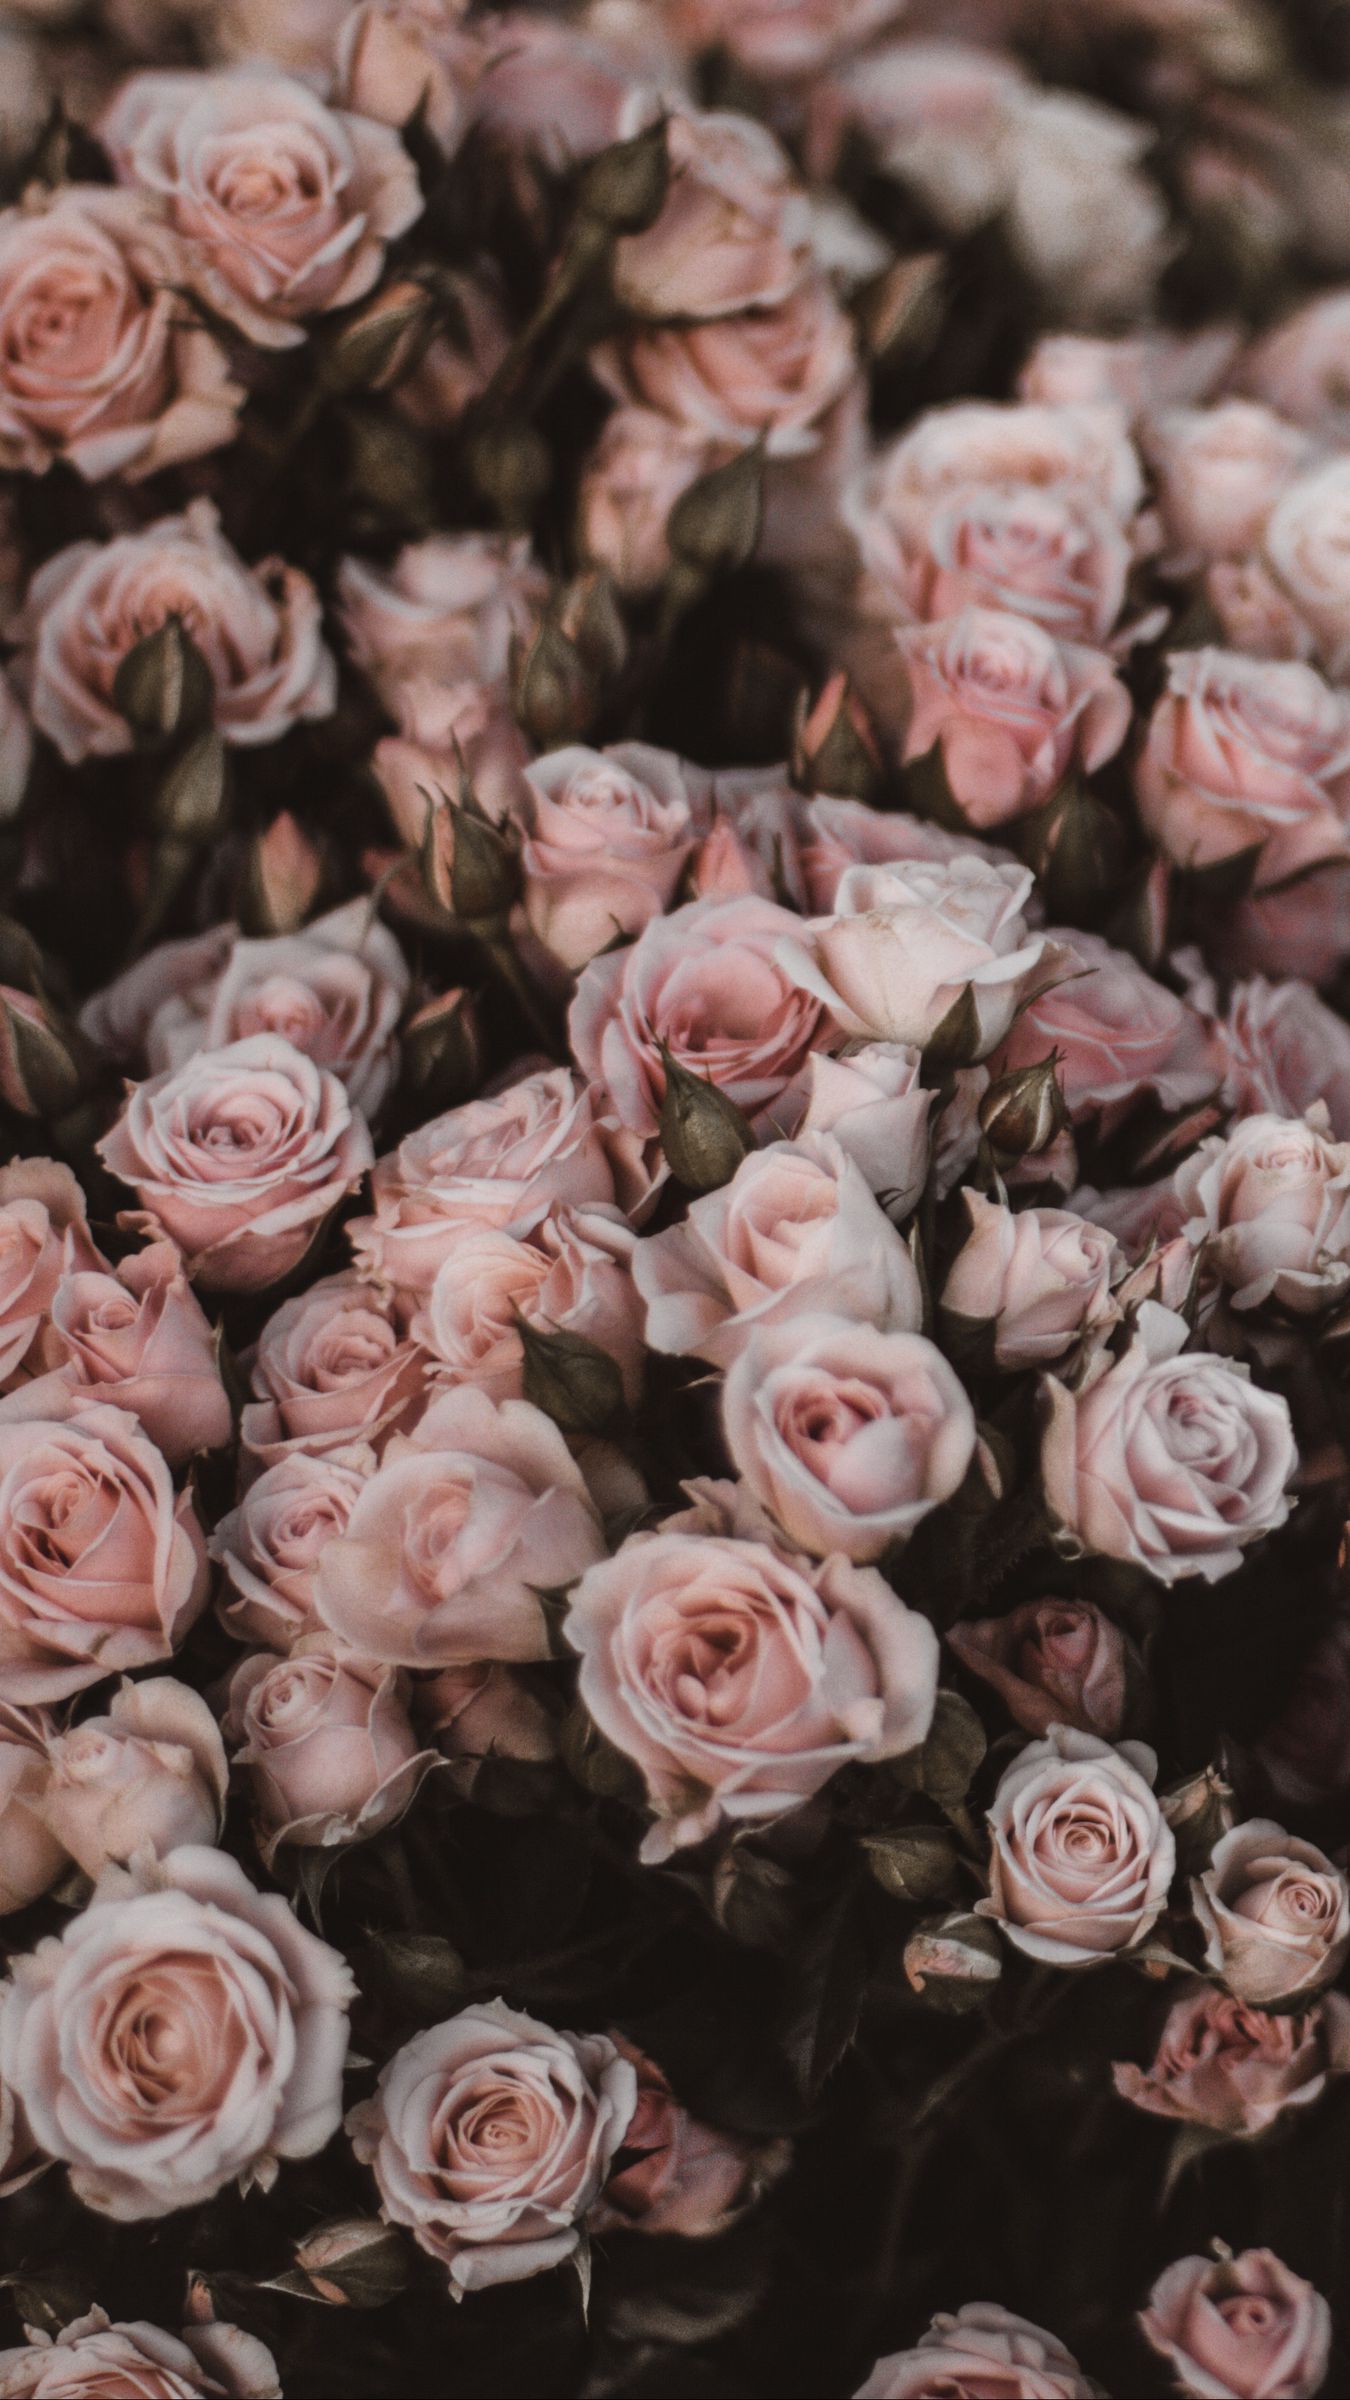 Download wallpaper 1350x2400 roses, bouquet, flowers, light pink, romance  iphone 8+/7+/6s+/6+ for parallax hd background